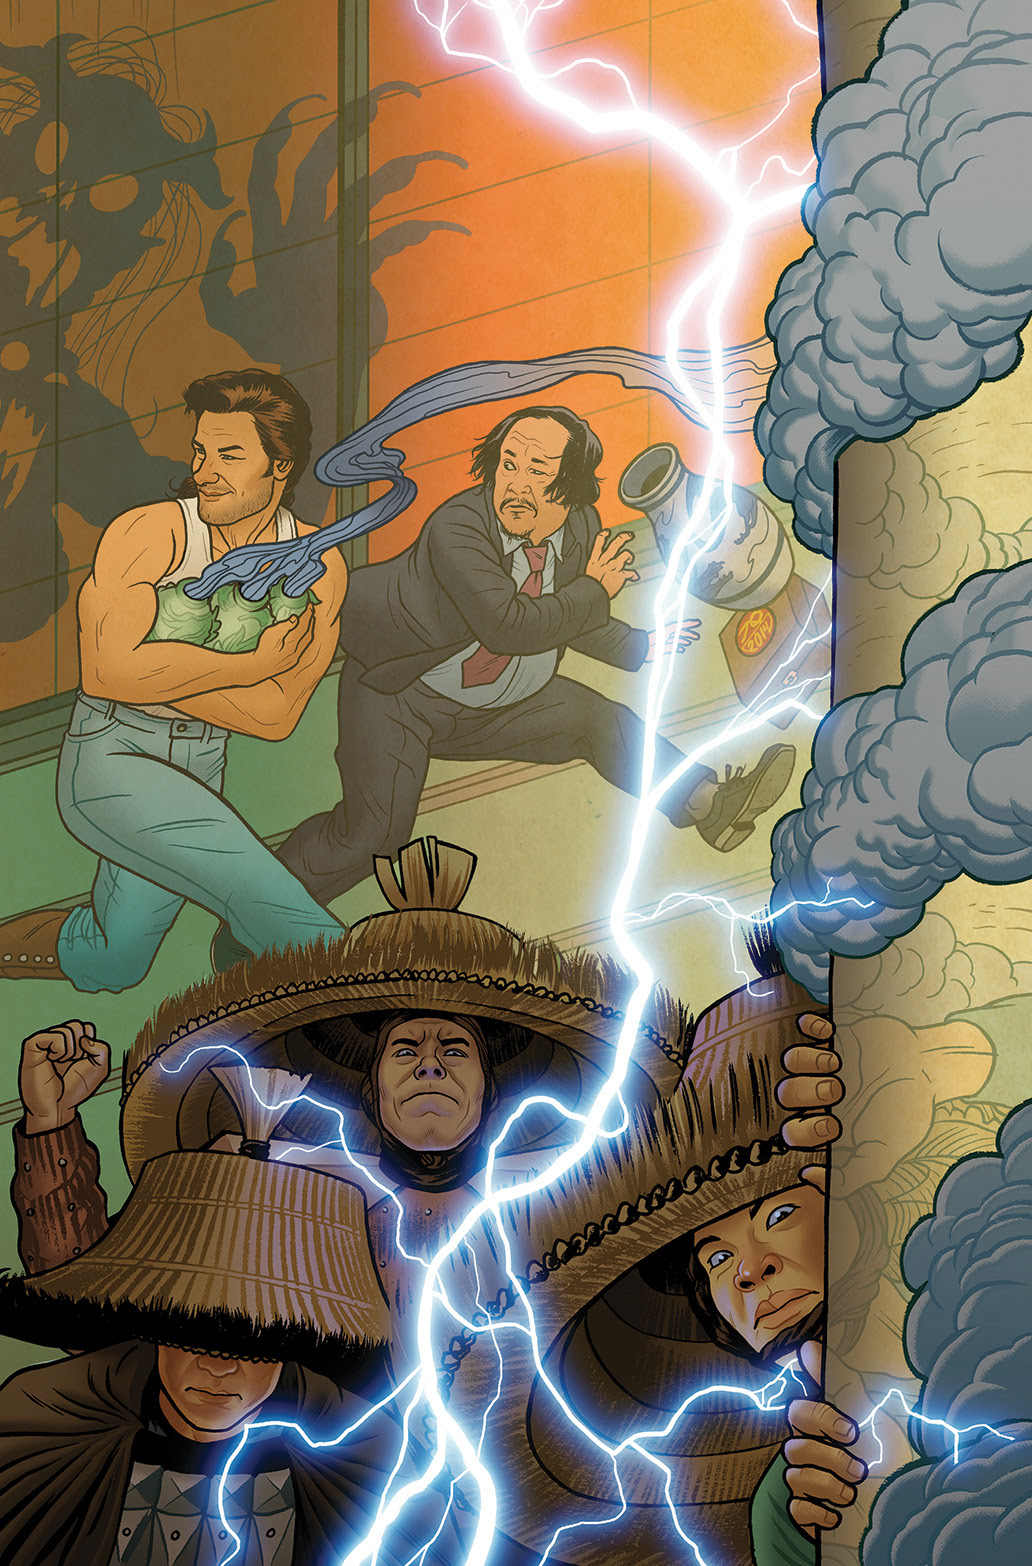 BIG TROUBLE IN LITTLE CHINA #4 Cover B by Joe Quinones